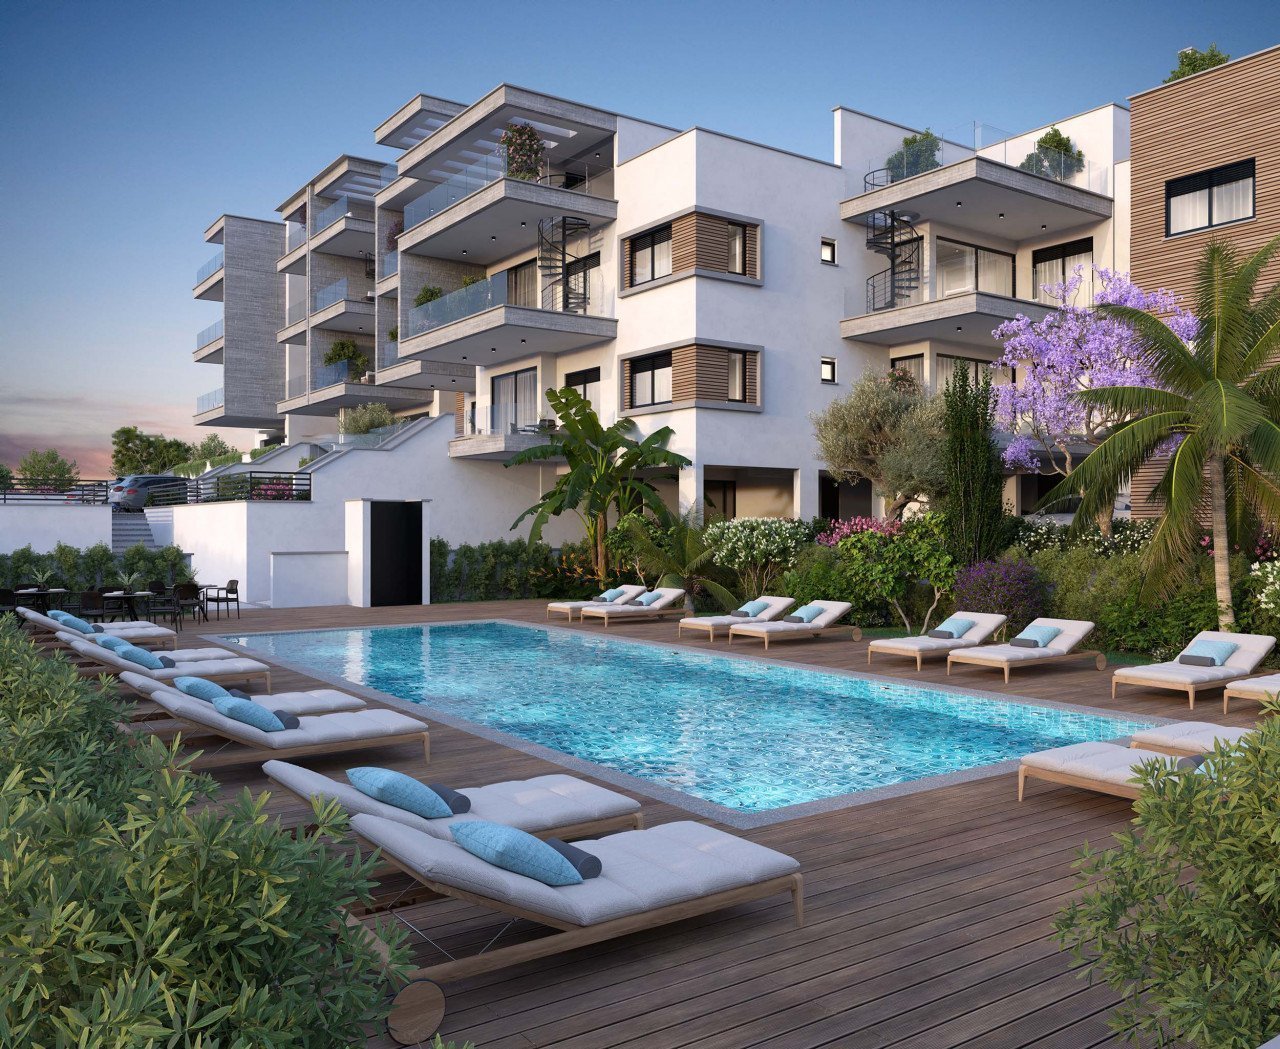 Property for Sale: Apartment (Flat) in Green Area, Limassol  | Key Realtor Cyprus